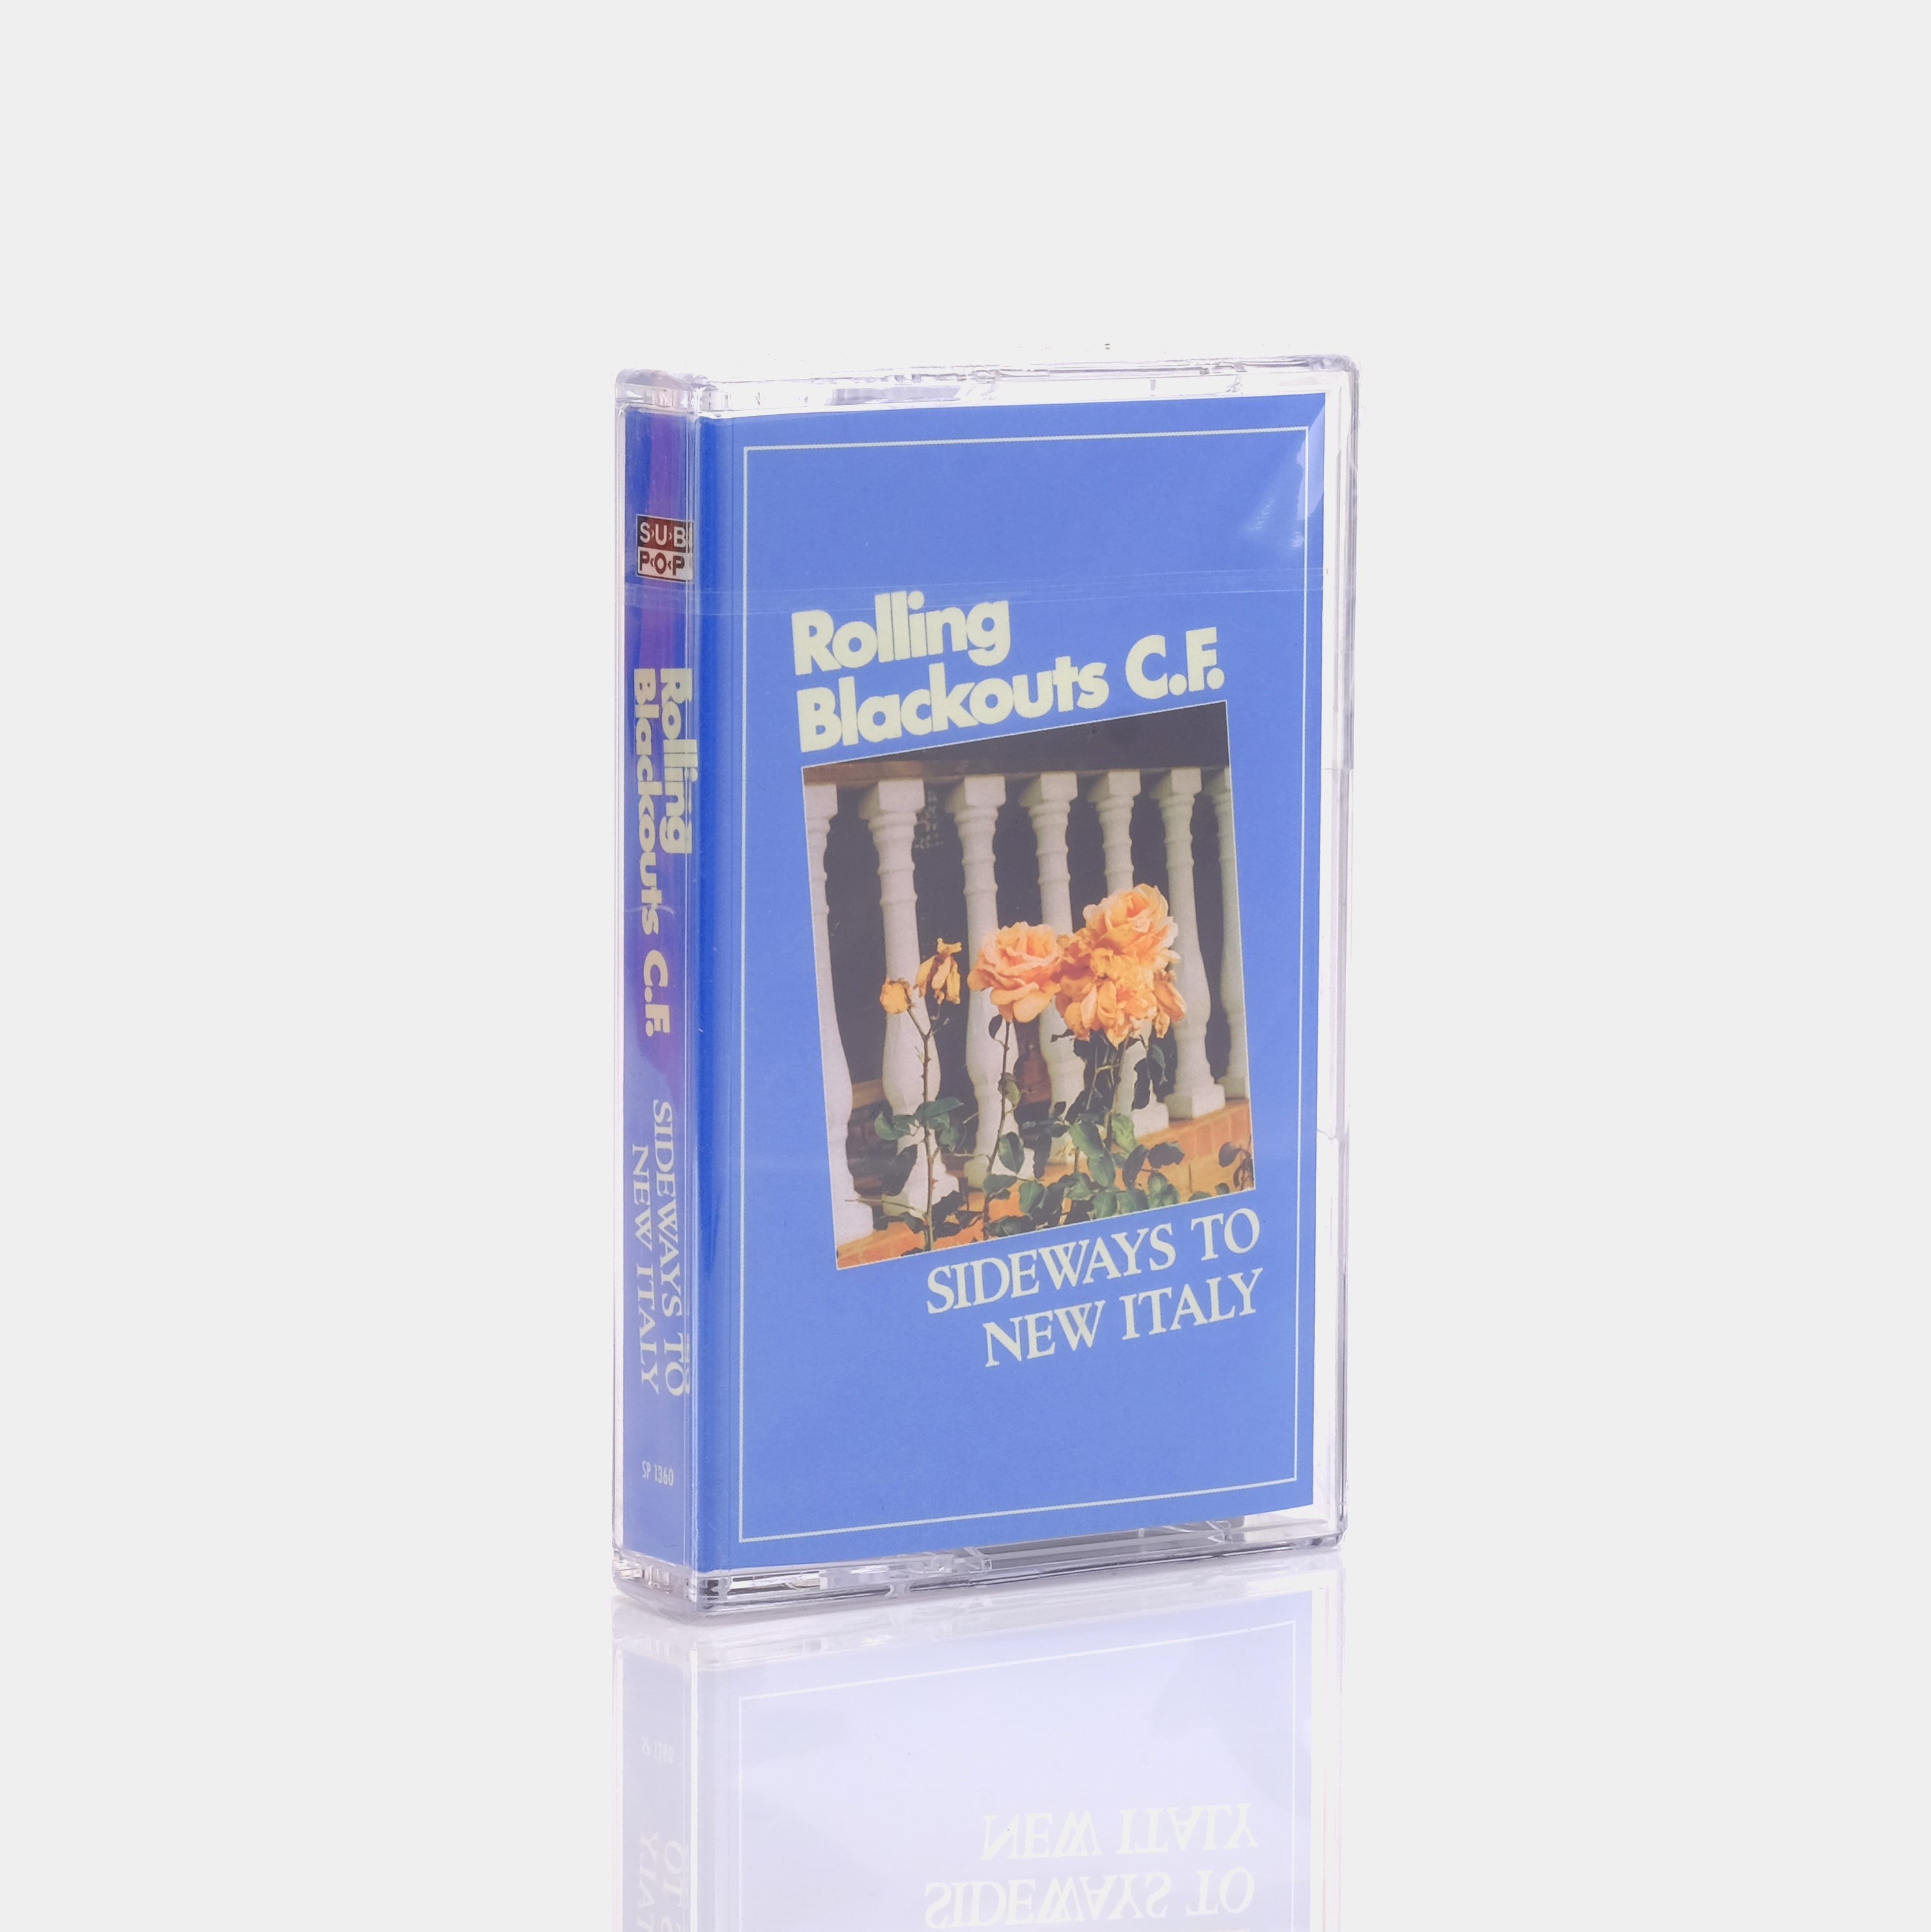 Rolling Blackouts Coastal Fever - Sideways to New Italy Cassette Tape